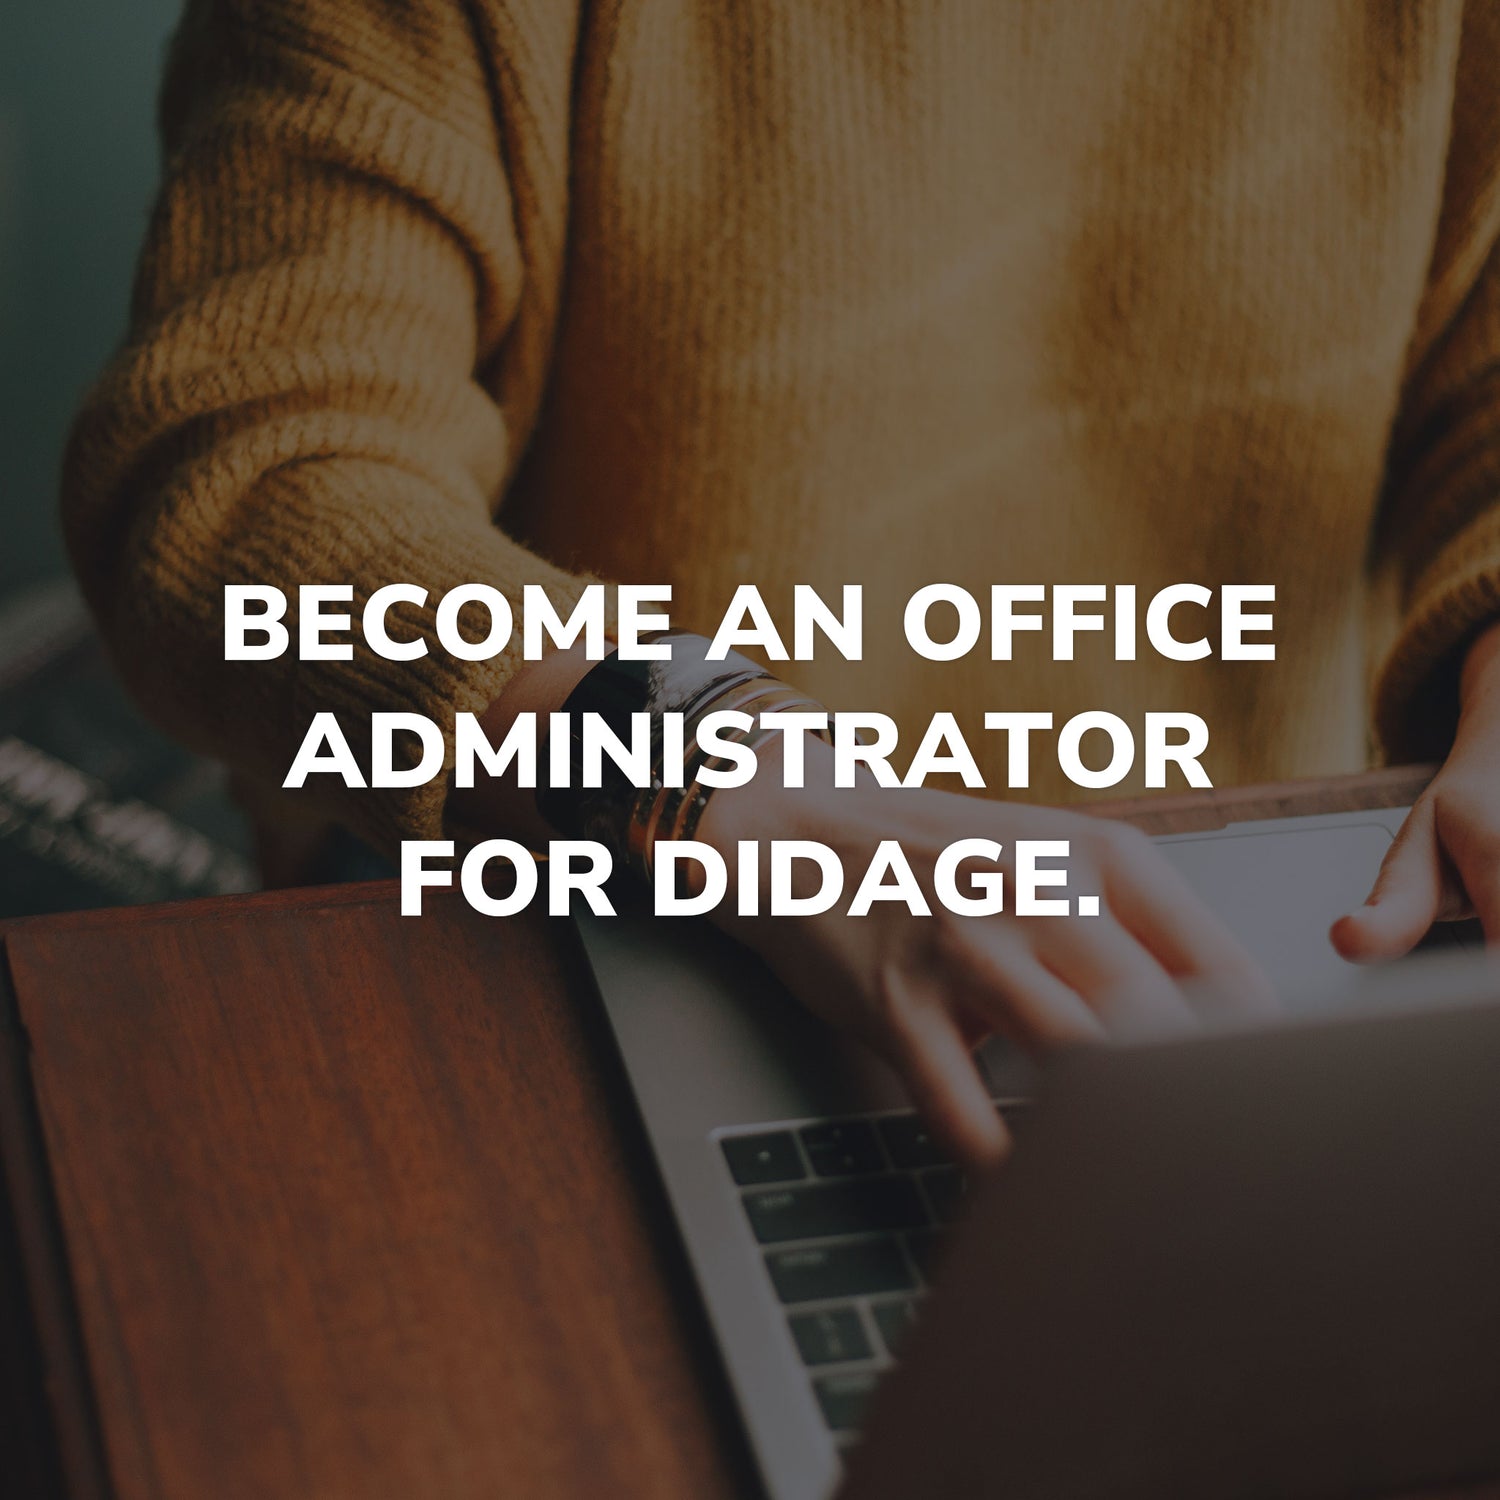 Didage Office & Administration